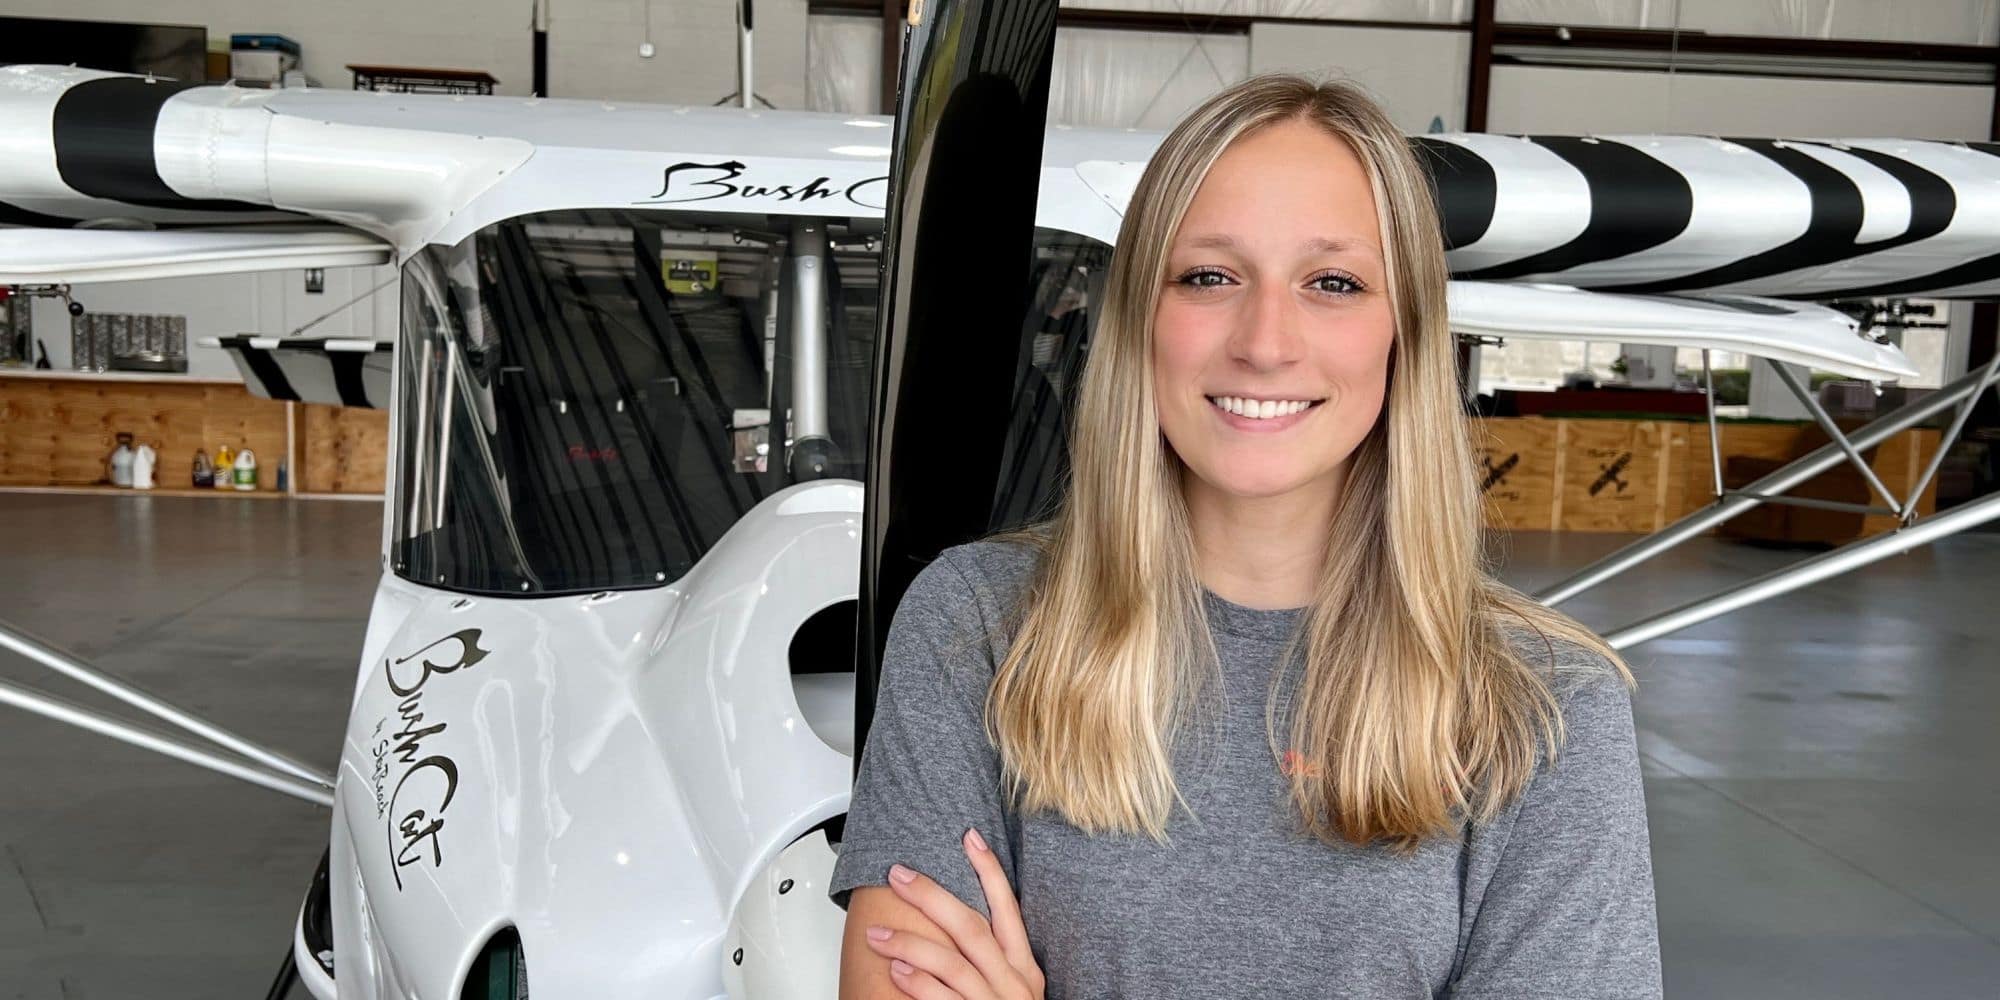 B.S. in Air Traffic Management major Rachel St. Louis is using profits from her jewelry business to build her own custom airplane. (Photo: Rachel St. Louis)